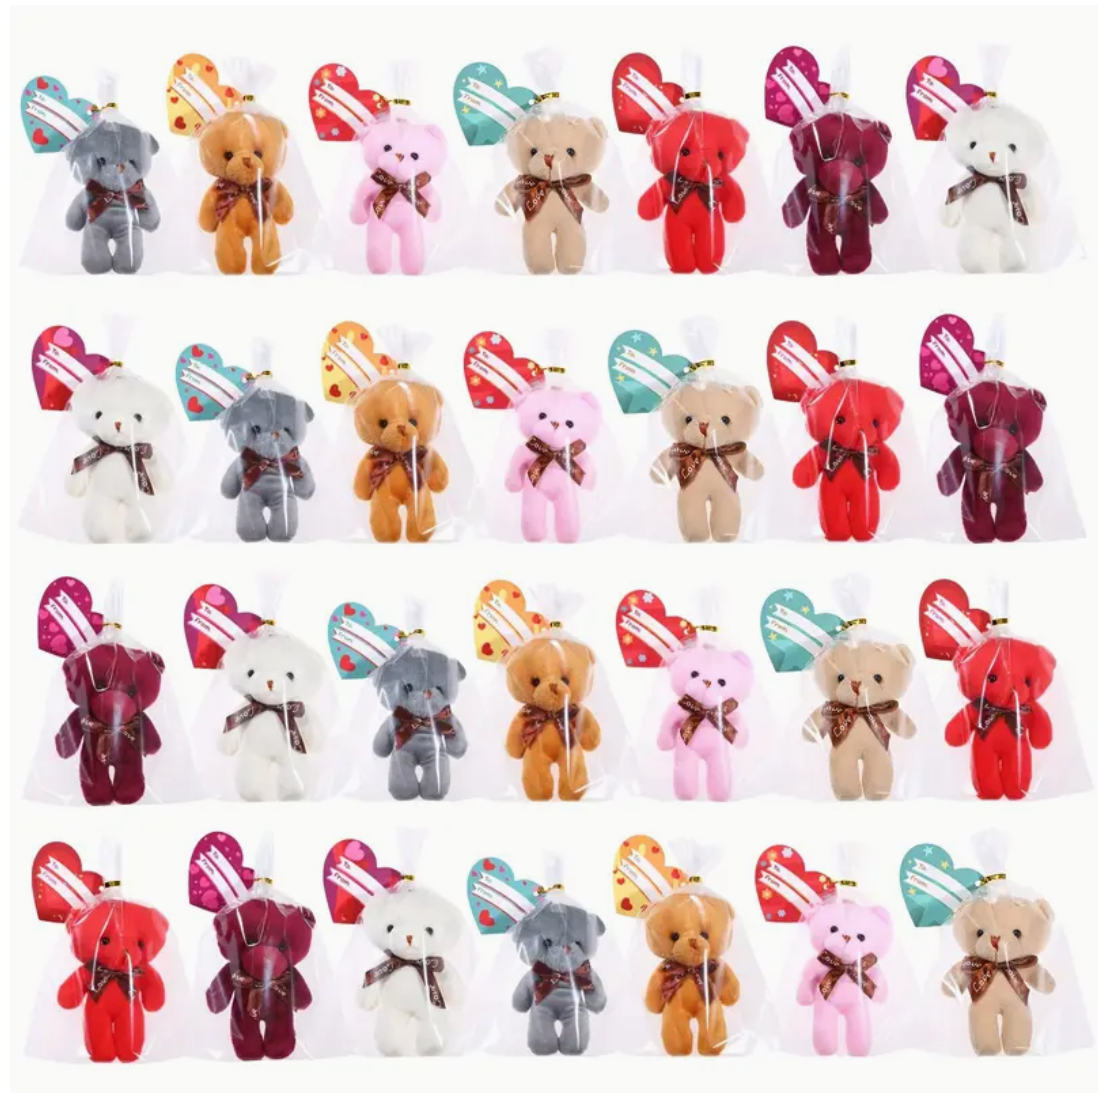 Love in Every Hug: 24 Adorable Valentine's Day Mini Plush Bears with Heartfelt Cards - Perfect for Parties, Gifts, and Classroom Fun